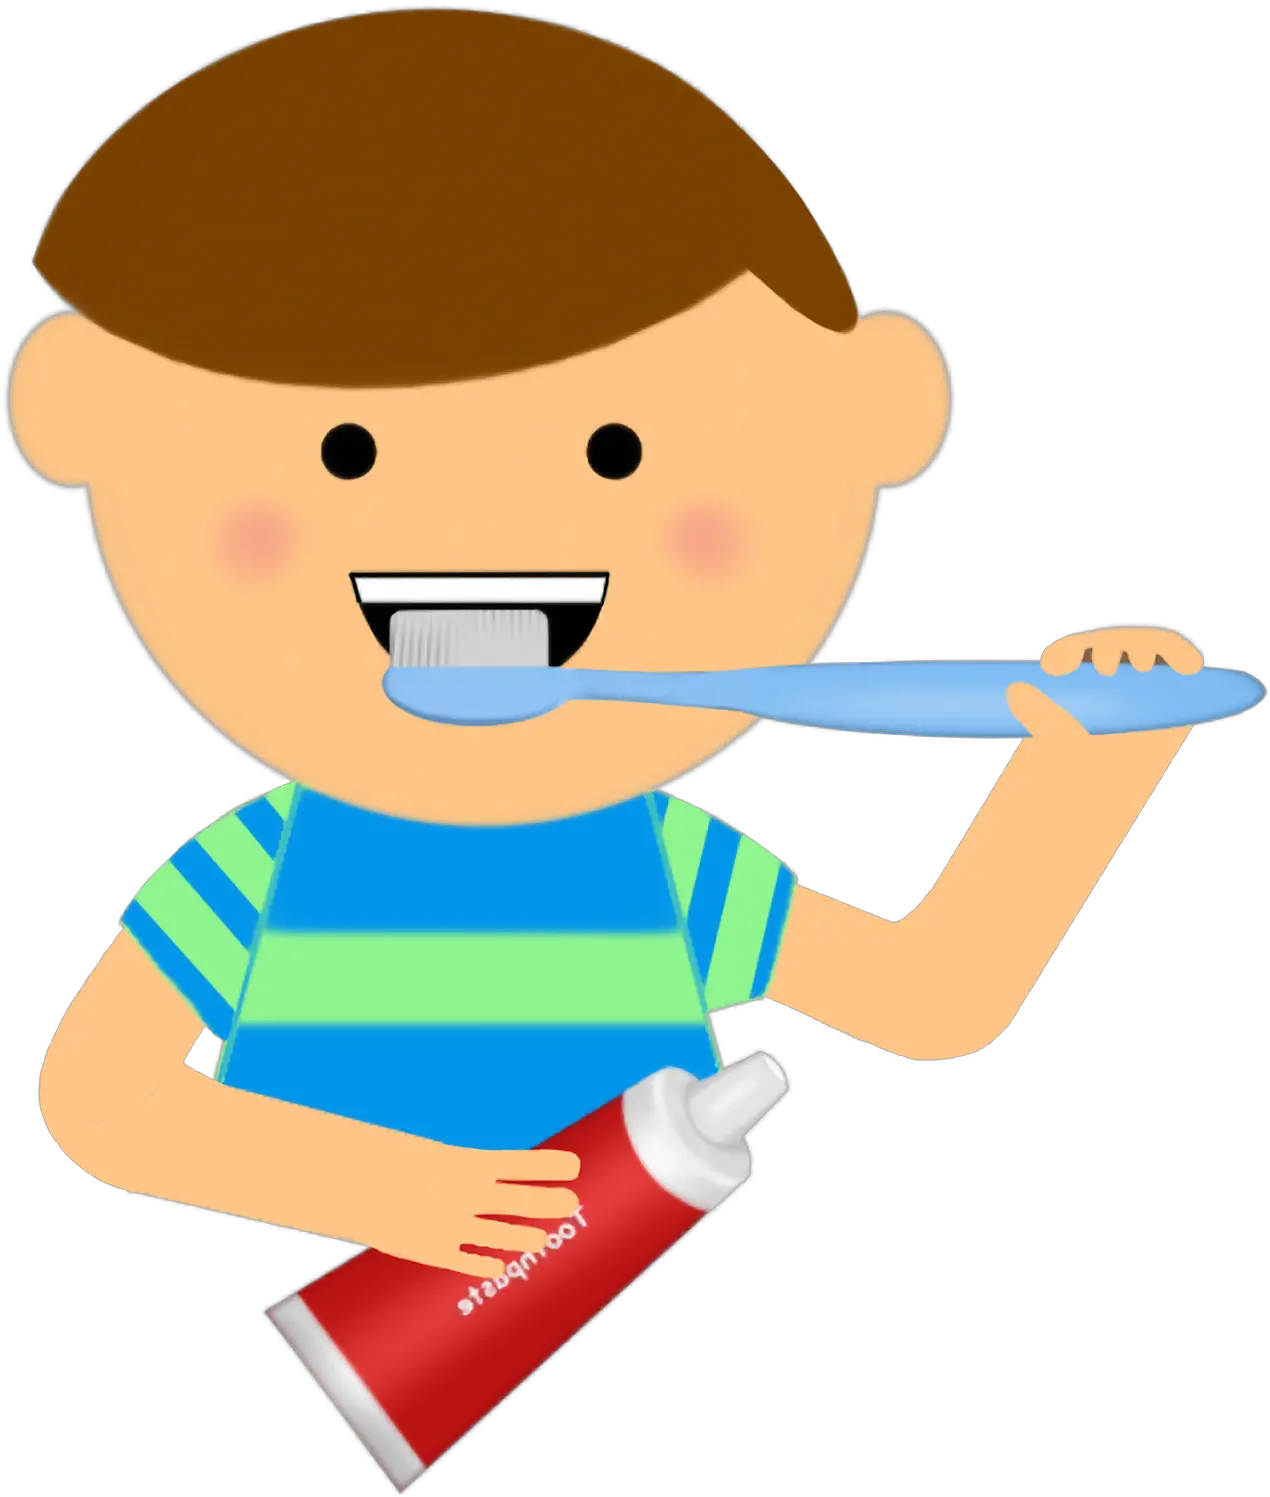 Download Precious Little Worlds Dental Oral Health Brush Brush Your Teeth Clip Art Png Teeth Png